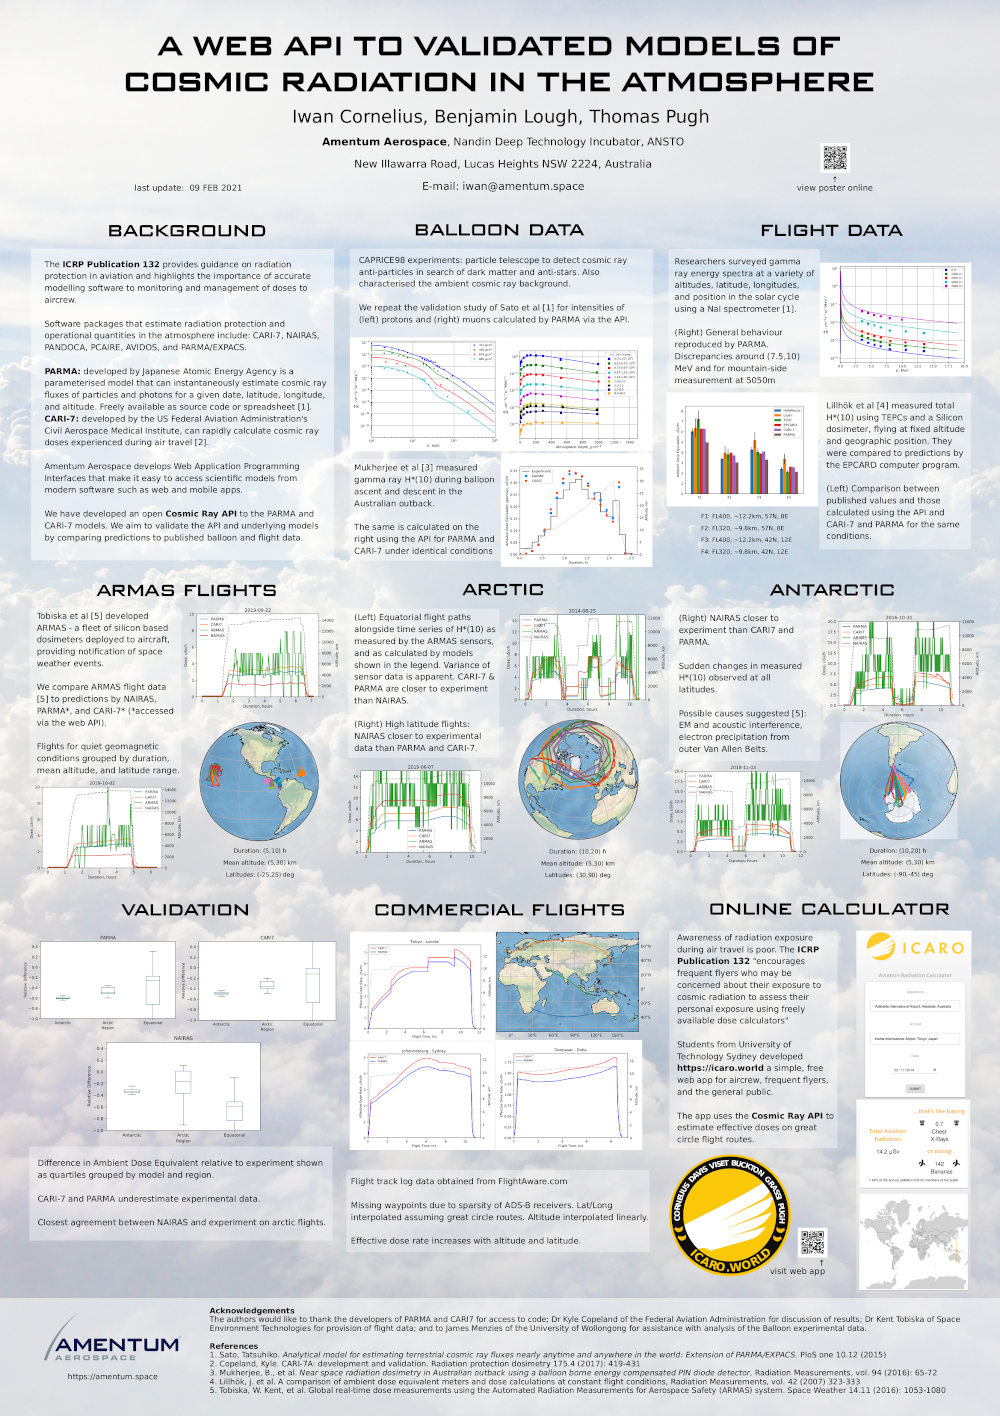 A scientific poster that compares model predictions and sensor measurements of cosmic radiation in ther atmosphere